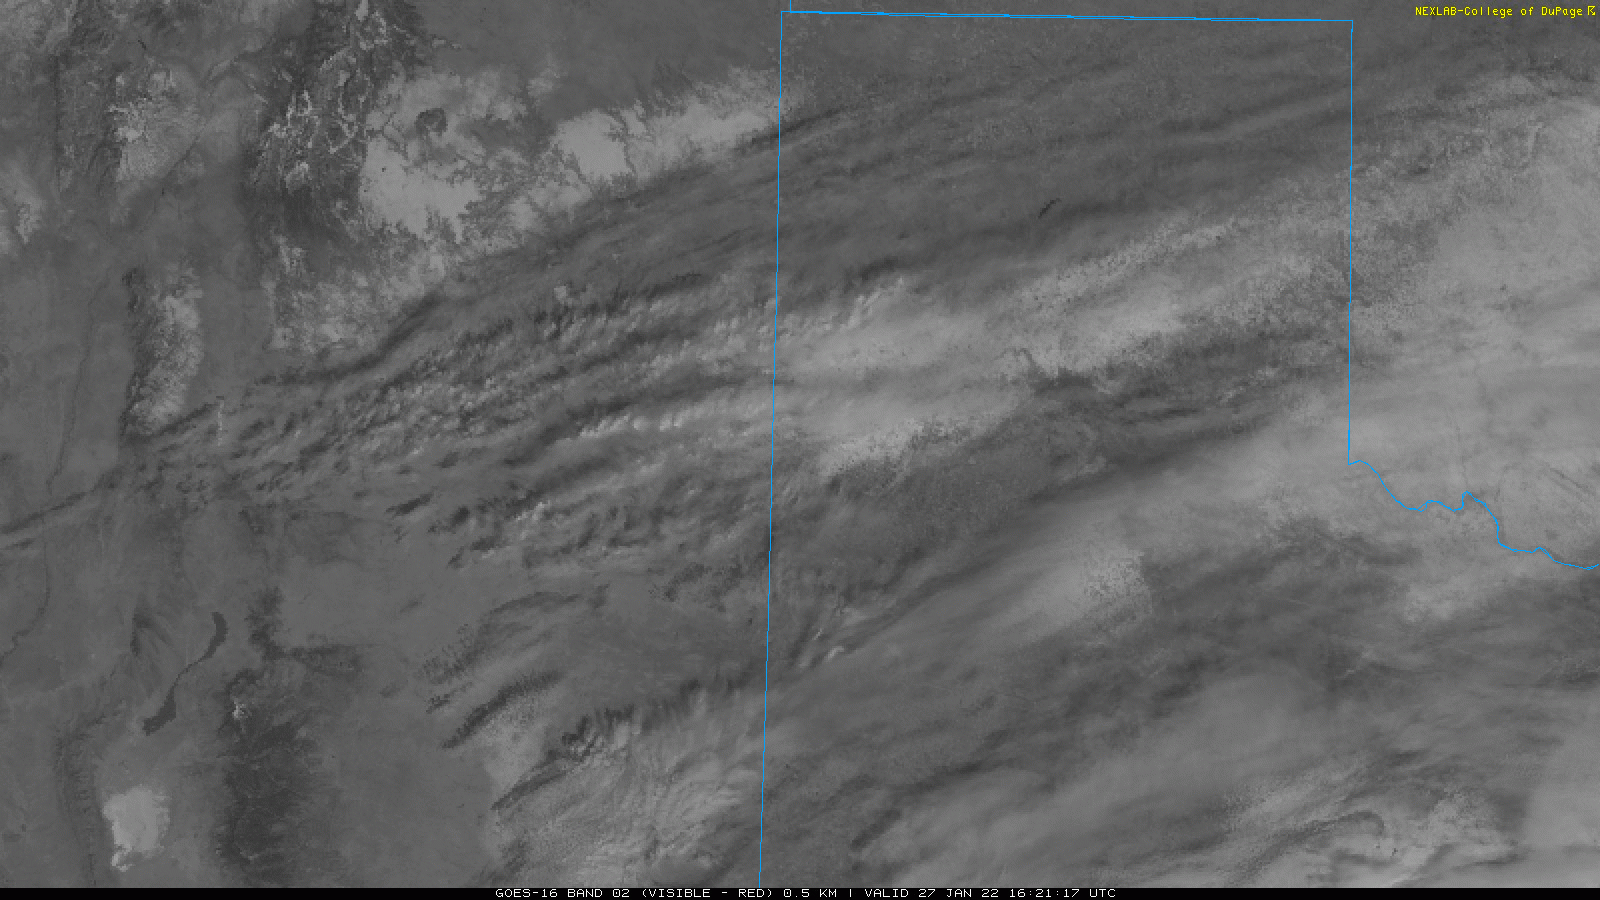 Visible satellite loop valid from 10:21 to 11:56 am on 27 January 2022. Several areas of snow are clearly visible beneath the high clouds streaming over the region.